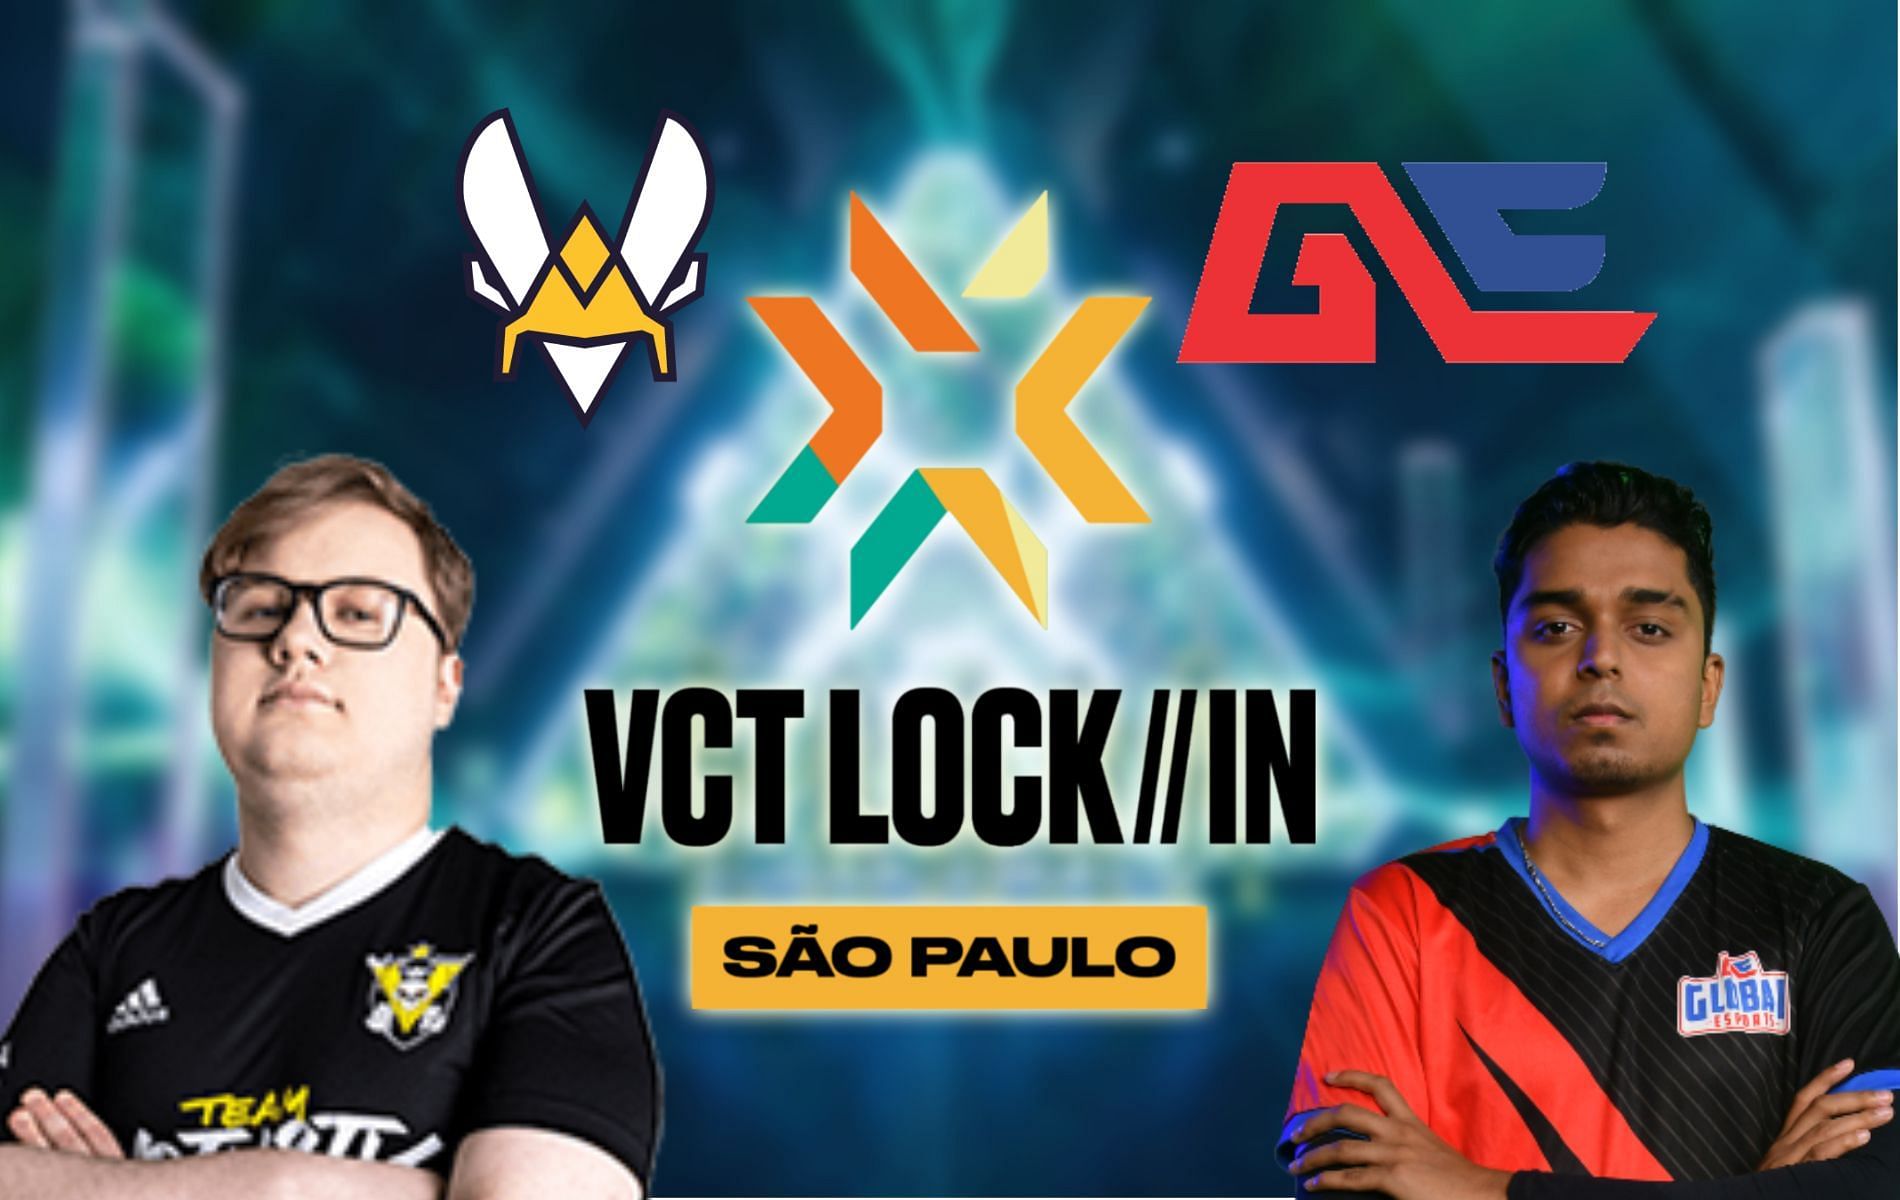 Global Esports vs Team Vitality: Who will win the Group Omega Round 1 matchup in VCT LOCK//IN? (Image via Sportskeeda)